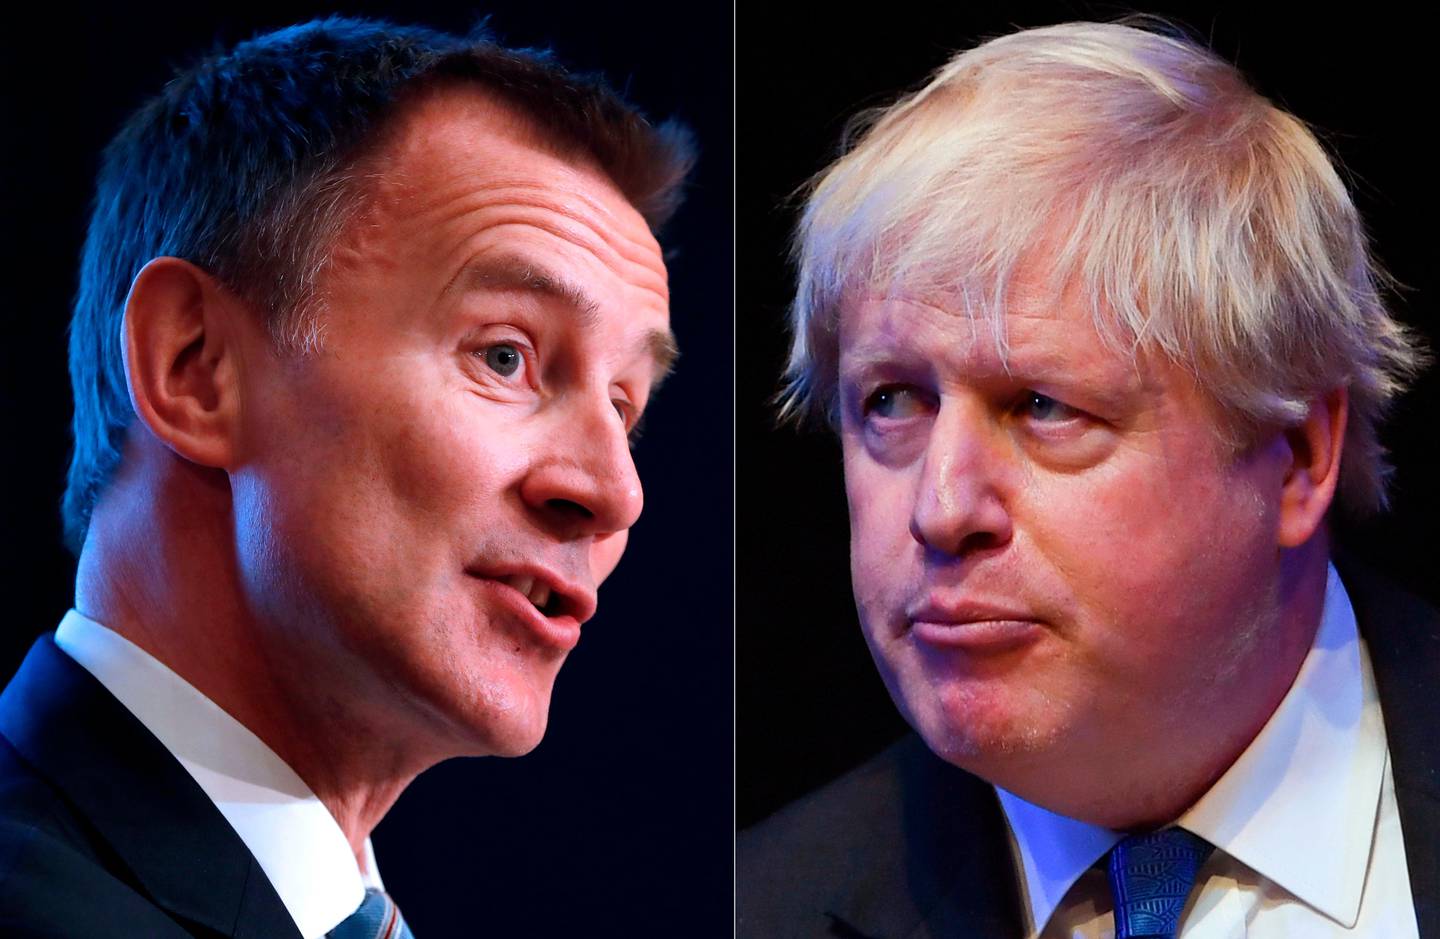 (FILES) In this file photo taken on February 20, 2019 A combination of file pictures created in London on June 21, 2019 shows Britain's Foreign Secretary Jeremy Hunt (L) giving a speech at the Konrad-Adenauer foundation in Berlin on February 20, 2019  and British Conservative Party politician Boris Johnson (R) giving a speech during a fringe event on the sidelines  of the Conservative Party Conference 2018 at the International Convention Centre in Birmingham, on October 2, 2018. - The new leader of the Conservative Party and new UK Prime Minister will be announced on July 23, 2019. (Photo by Odd ANDERSEN and Paul ELLIS / AFP)